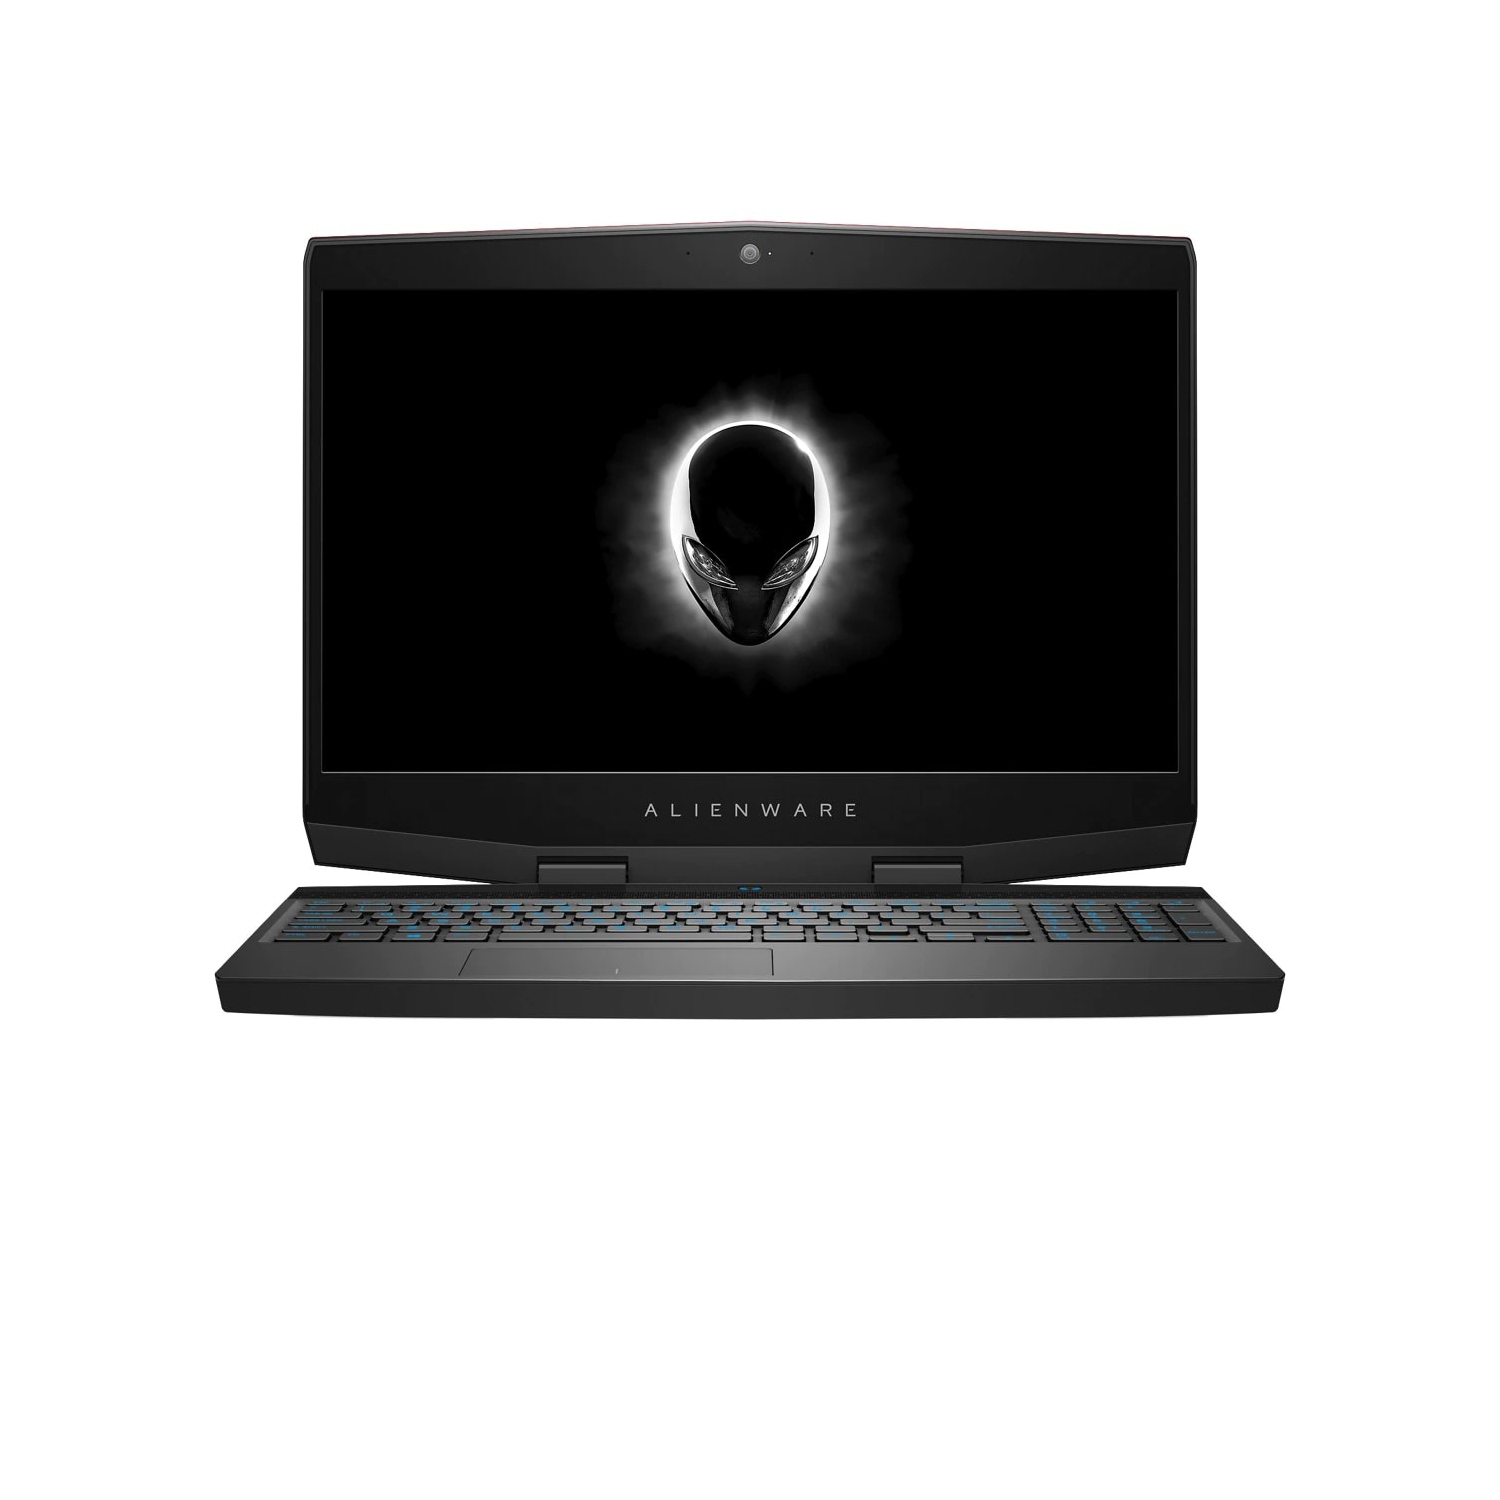 Refurbished (Excellent) – Dell Alienware m15 Gaming Laptop (2018) | 15.6" FHD | Core i7 - 1TB SSD - 16GB RAM - GTX 1070 | 6 Cores @ 4.1 GHz - 8GB GDDR5